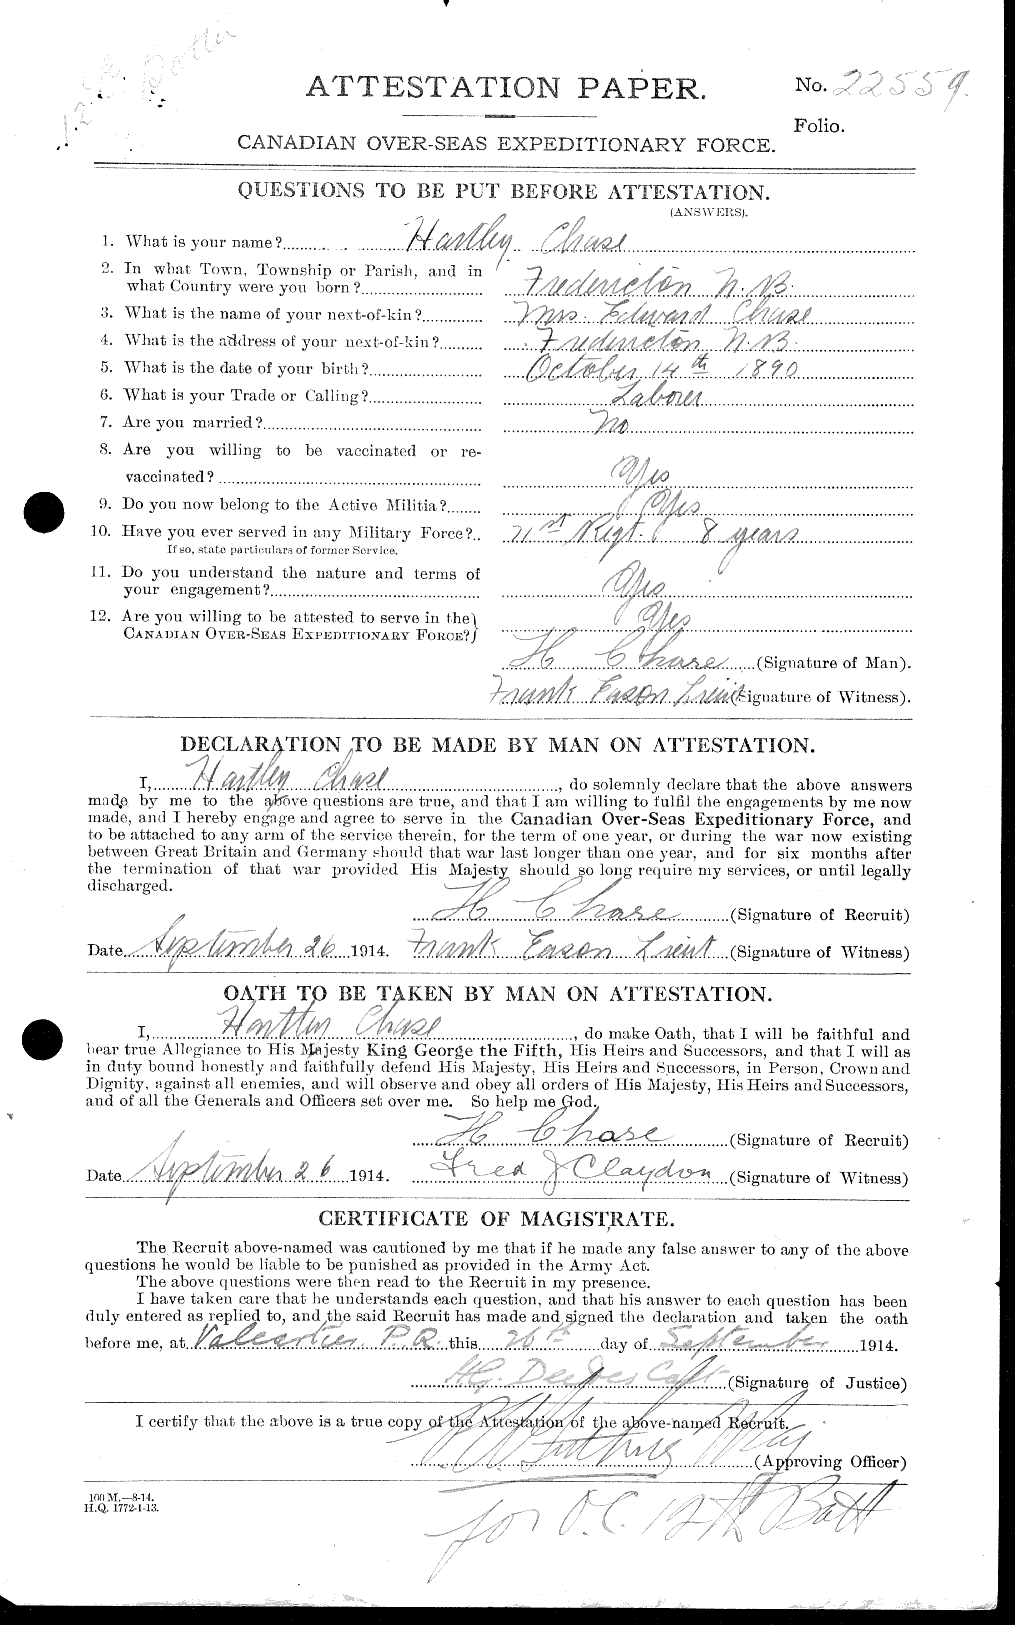 Personnel Records of the First World War - CEF 016012a